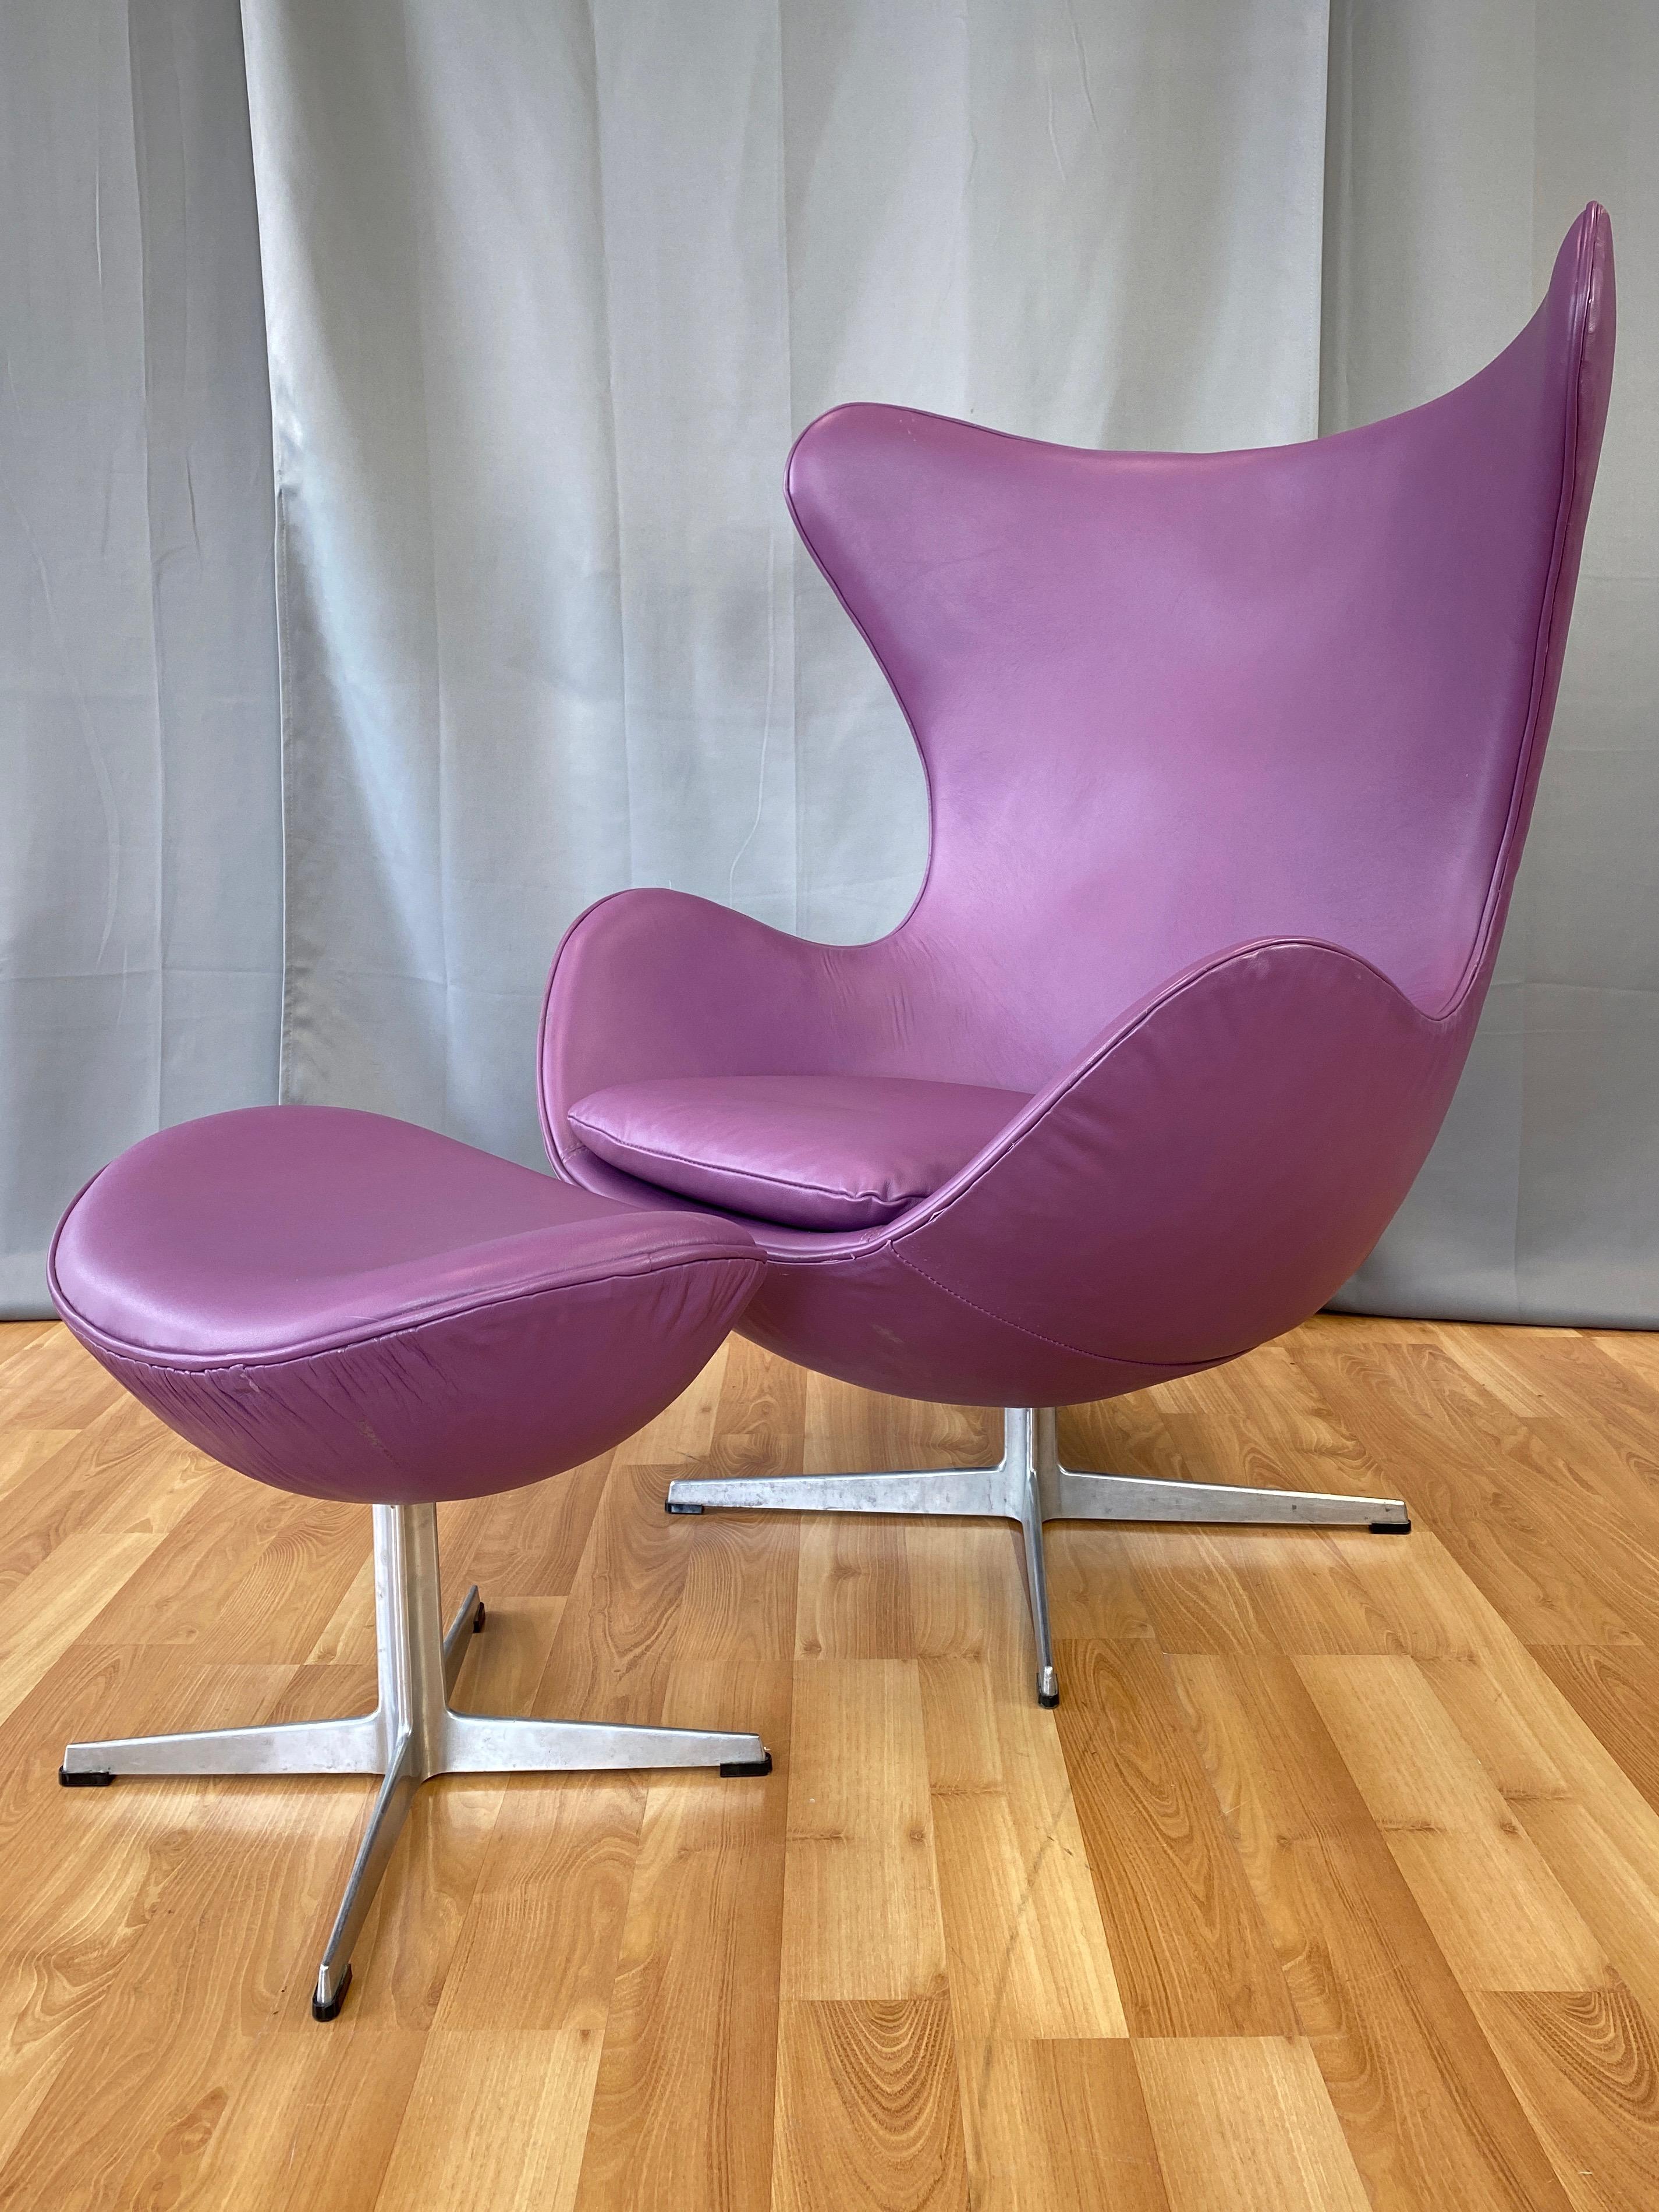 A vintage purple leather model 3316 Egg chair with matching model 3127 footstool by Arne Jacobsen for Fritz Hansen. 

Designed in 1958 for the SAS Royal Hotel in Copenhagen, we believe this set dates from the 1960s. Purple leather upholstery is